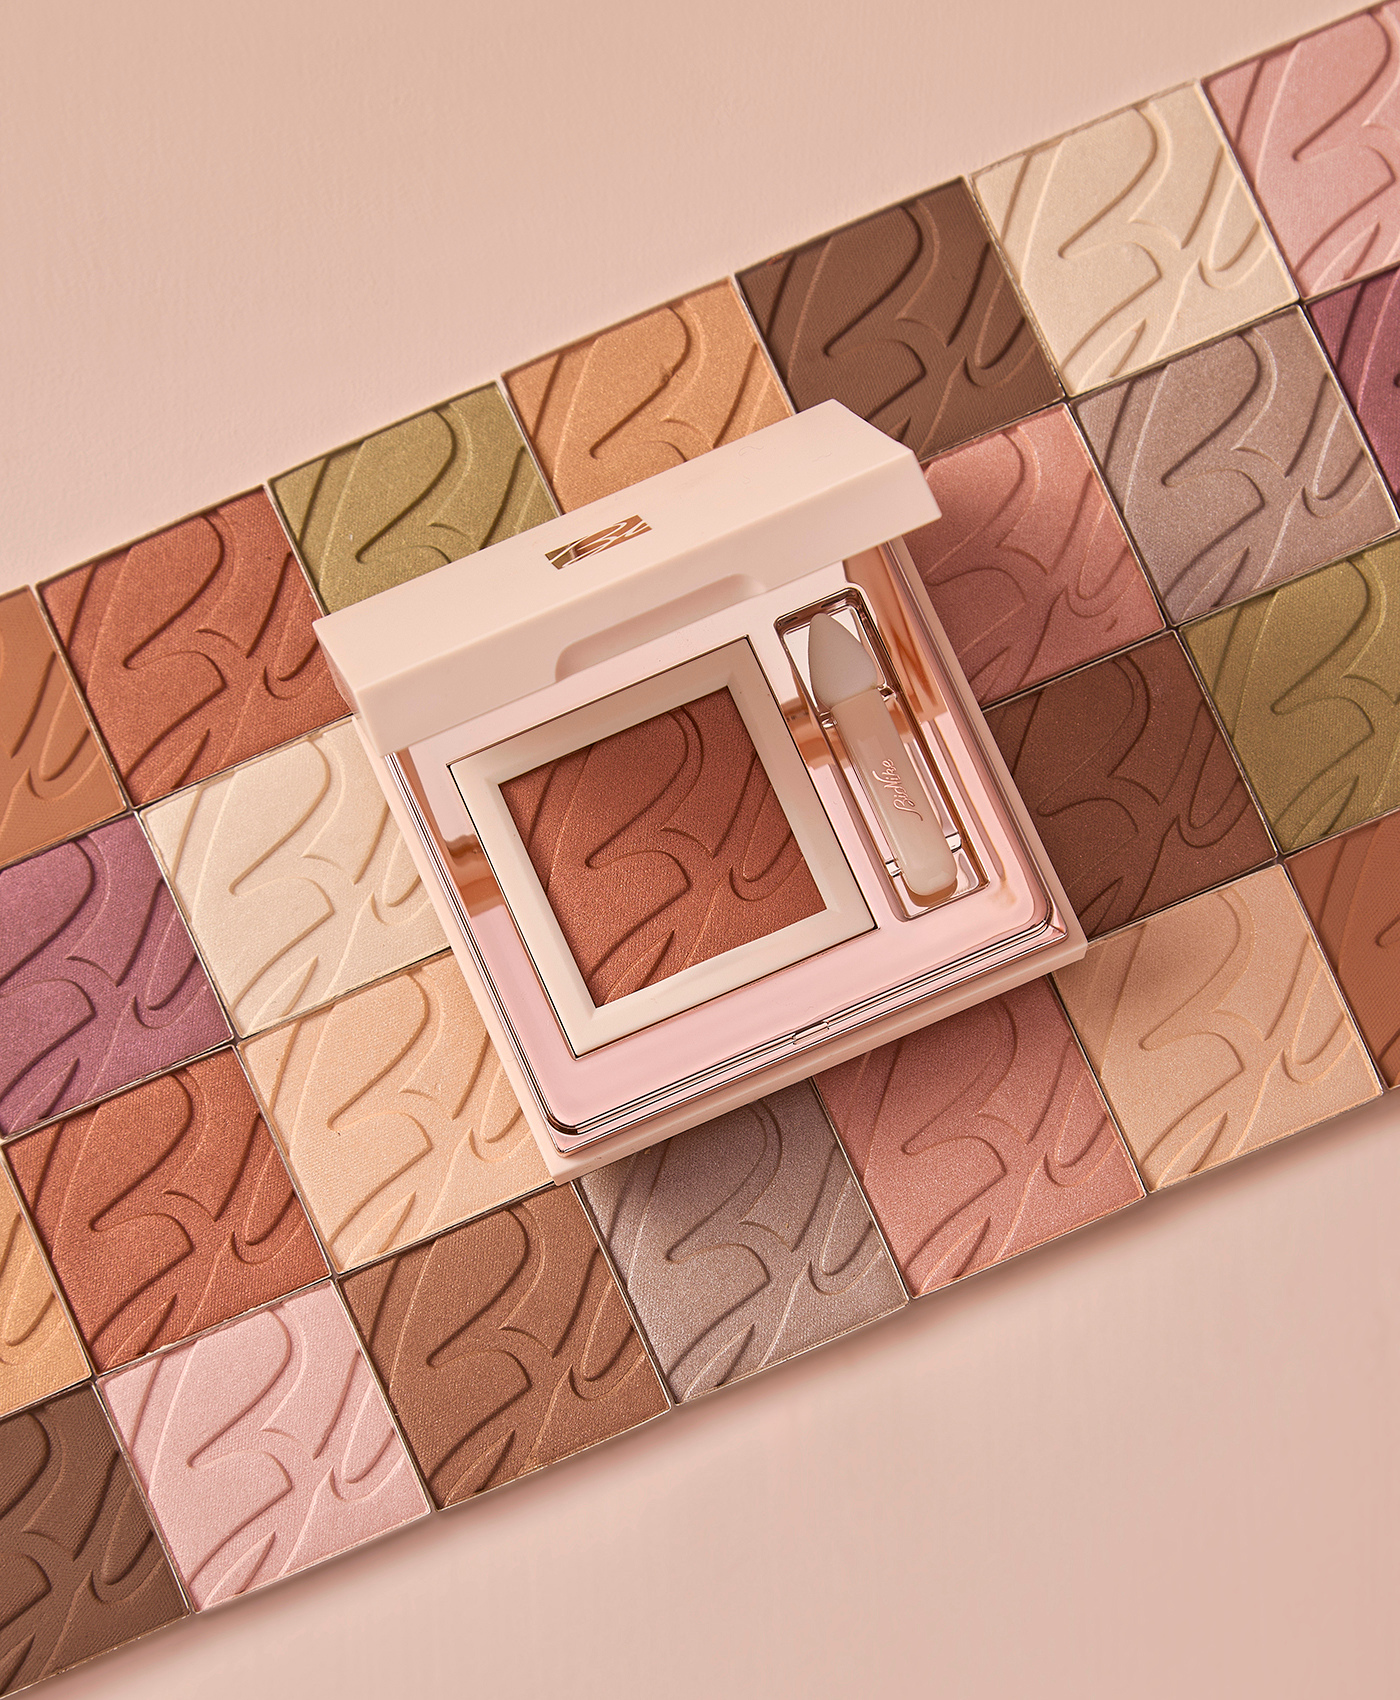 SILKY TOUCH Compact eyeshadow - BioNike - Sito Ufficiale